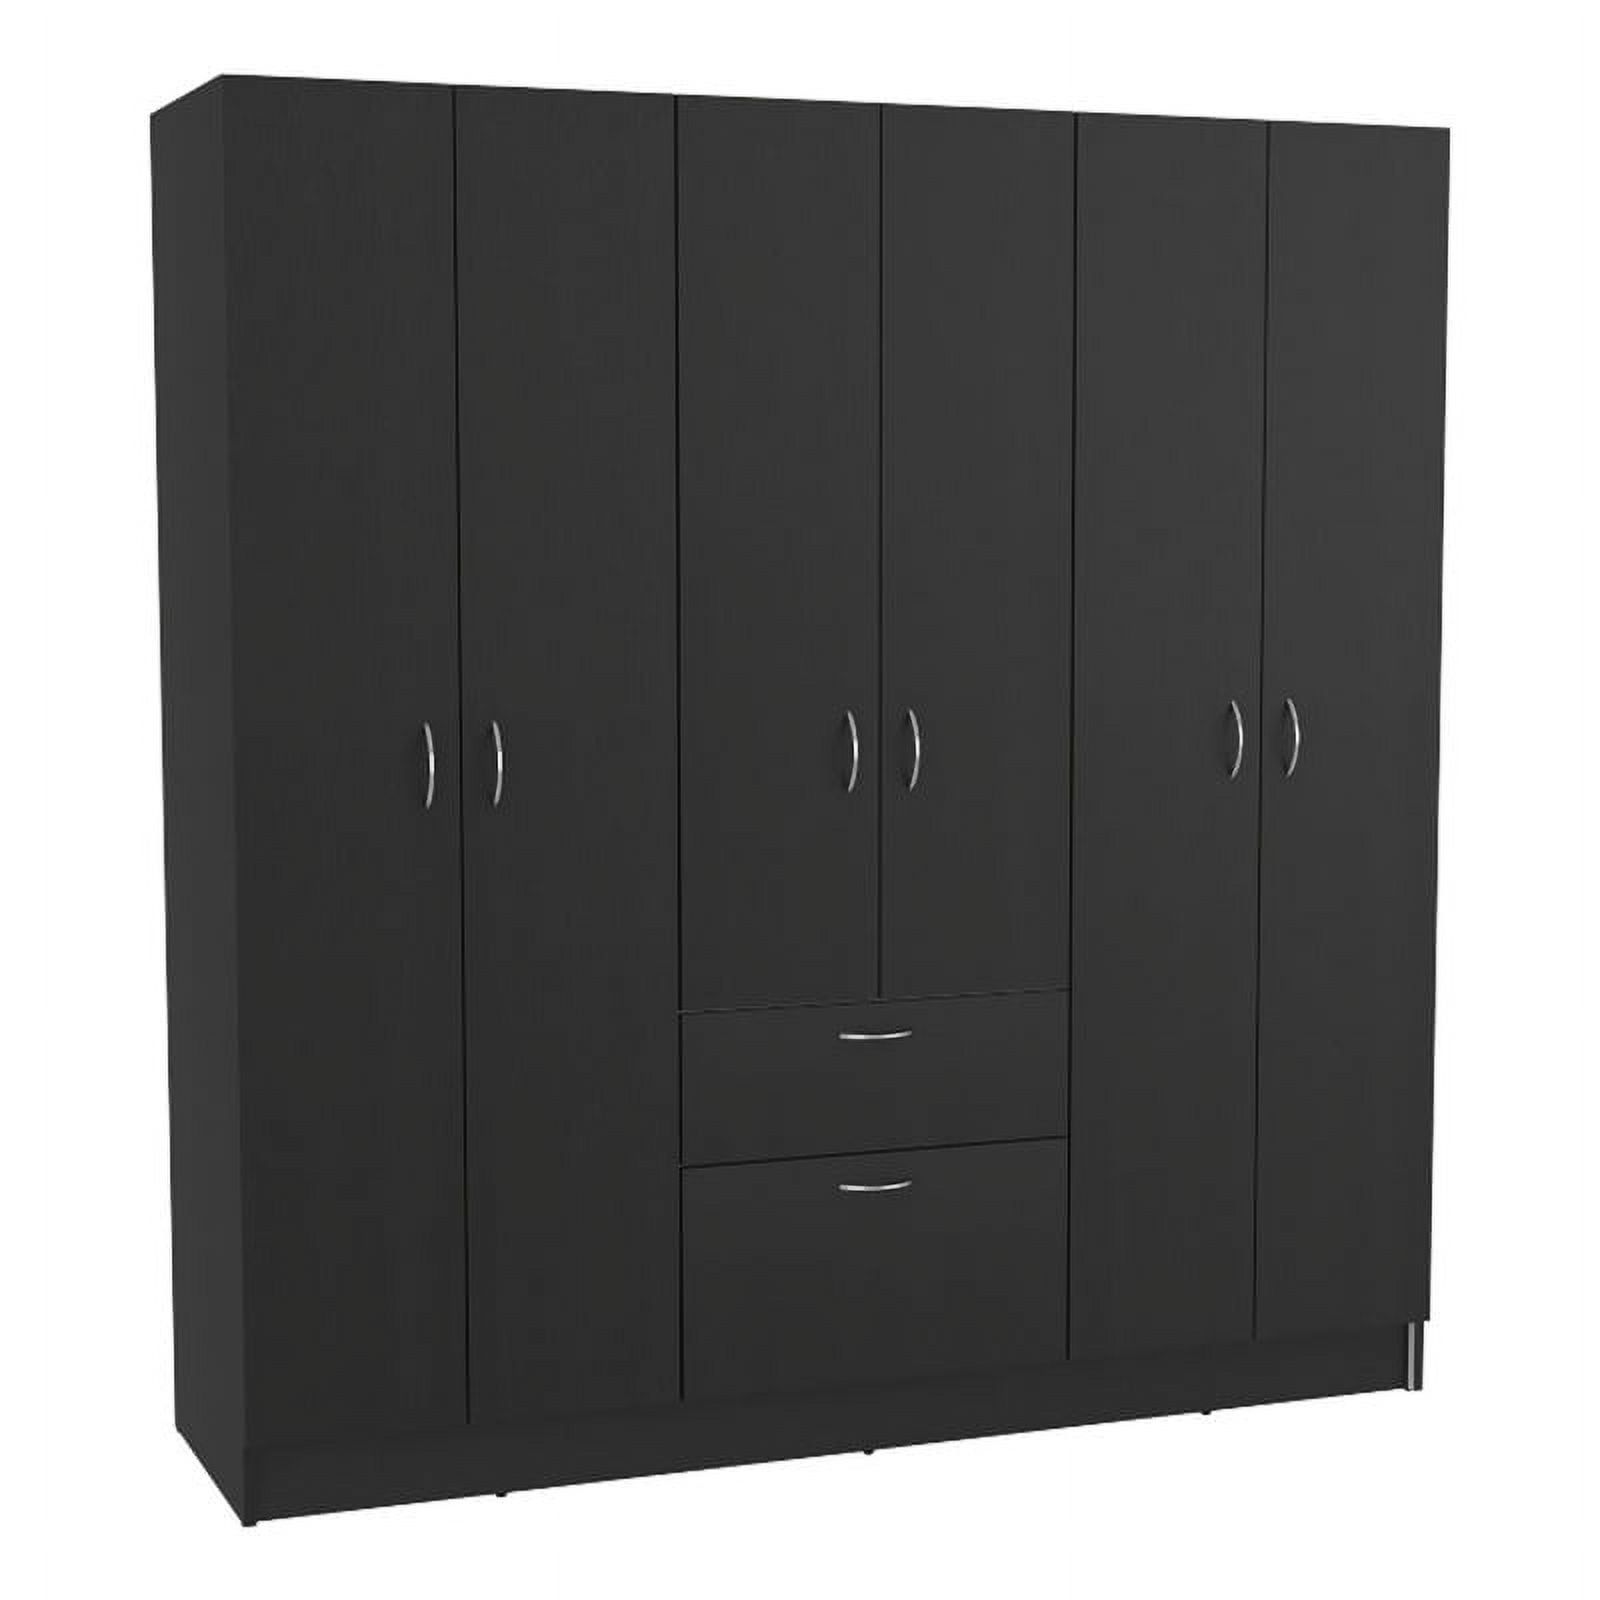 Atlin Designs 6 Door Modern Wood Bedroom Armoire In Black Wenge/white –  Walmart With Black Wardrobes With Drawers (View 14 of 20)